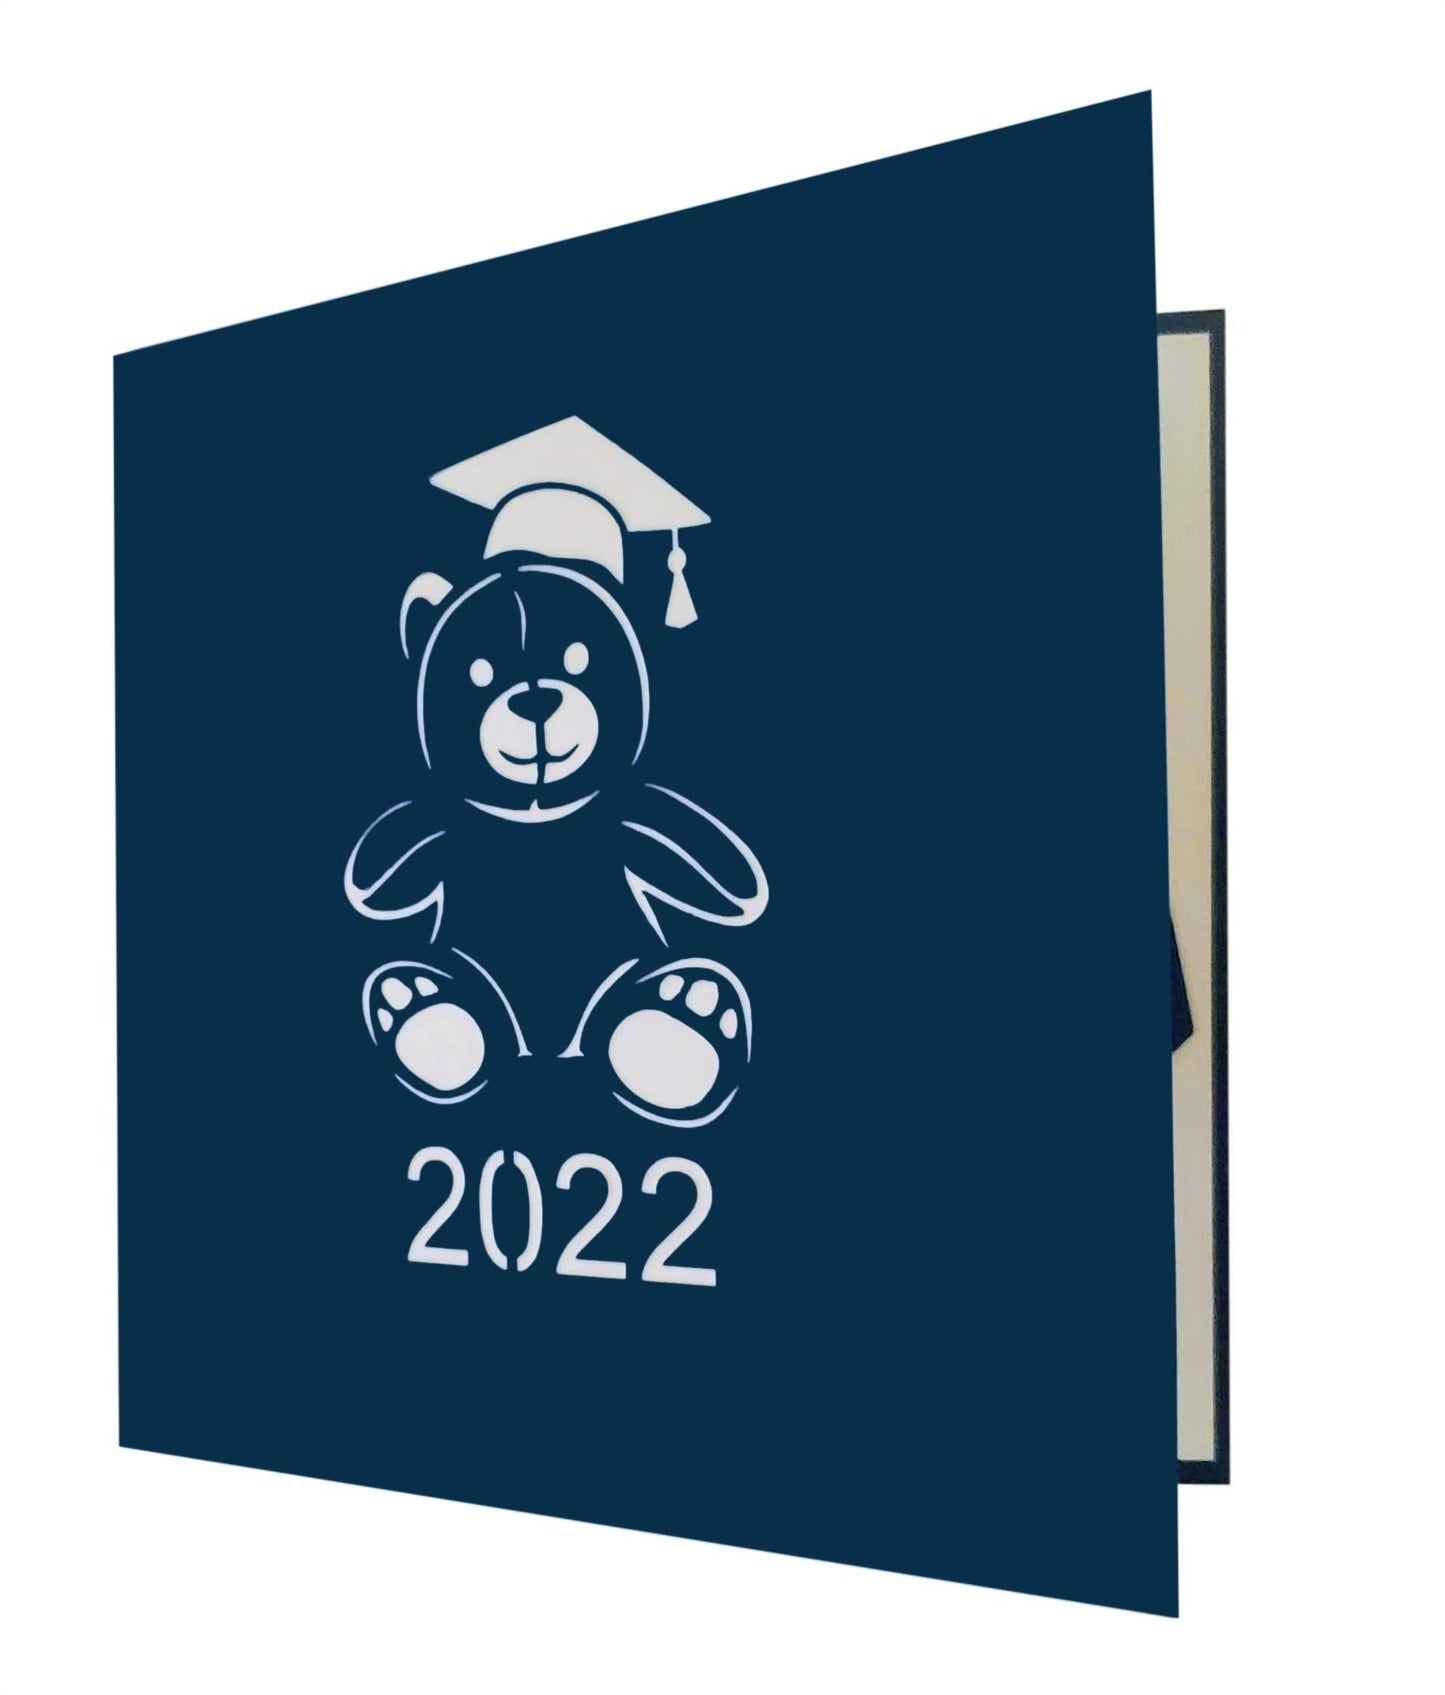 2022 Graduation Happy Bear 3D Pop Up Greeting Card - Awesome - Congrats - Congratulations - Graduati - iGifts And Cards